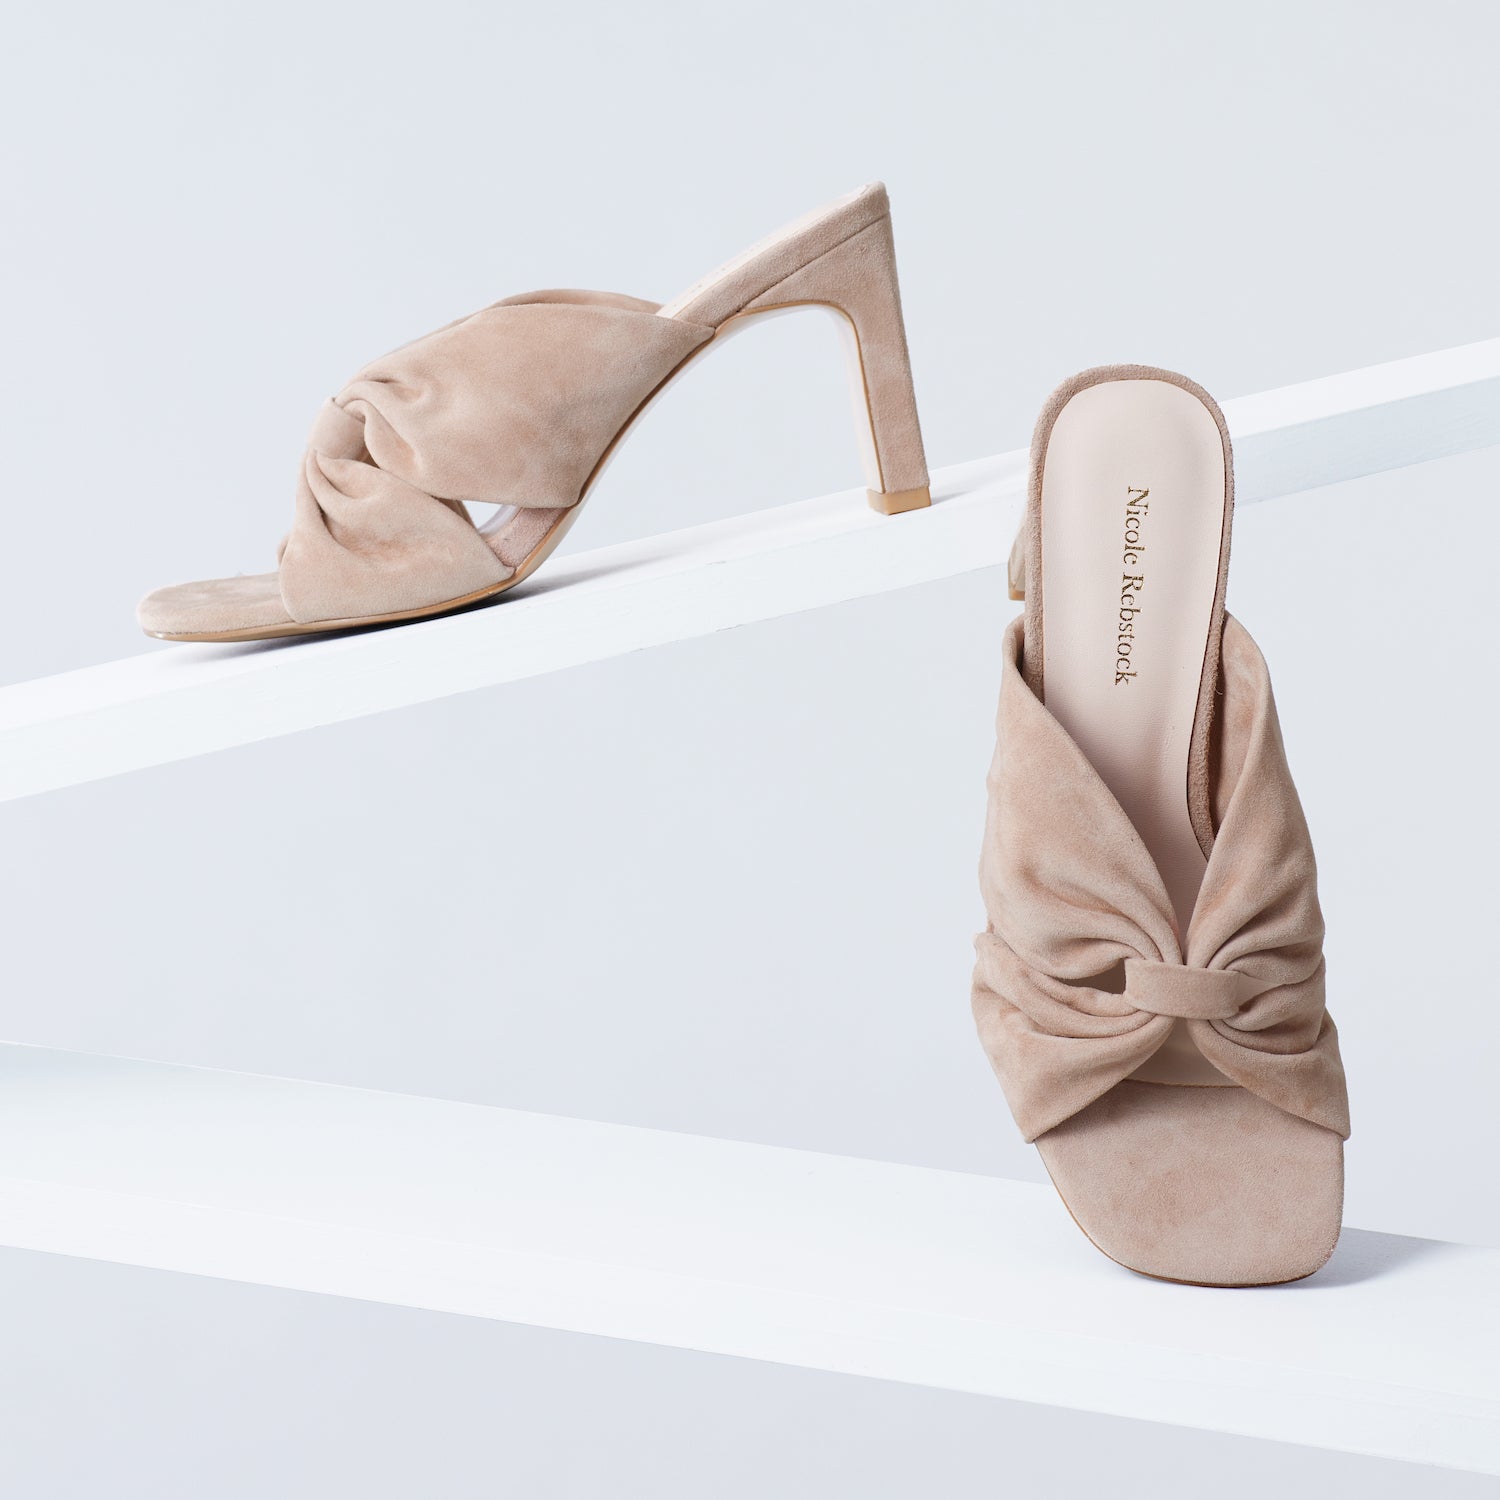 Valerie Sandal 75mm | Dirty blush suede